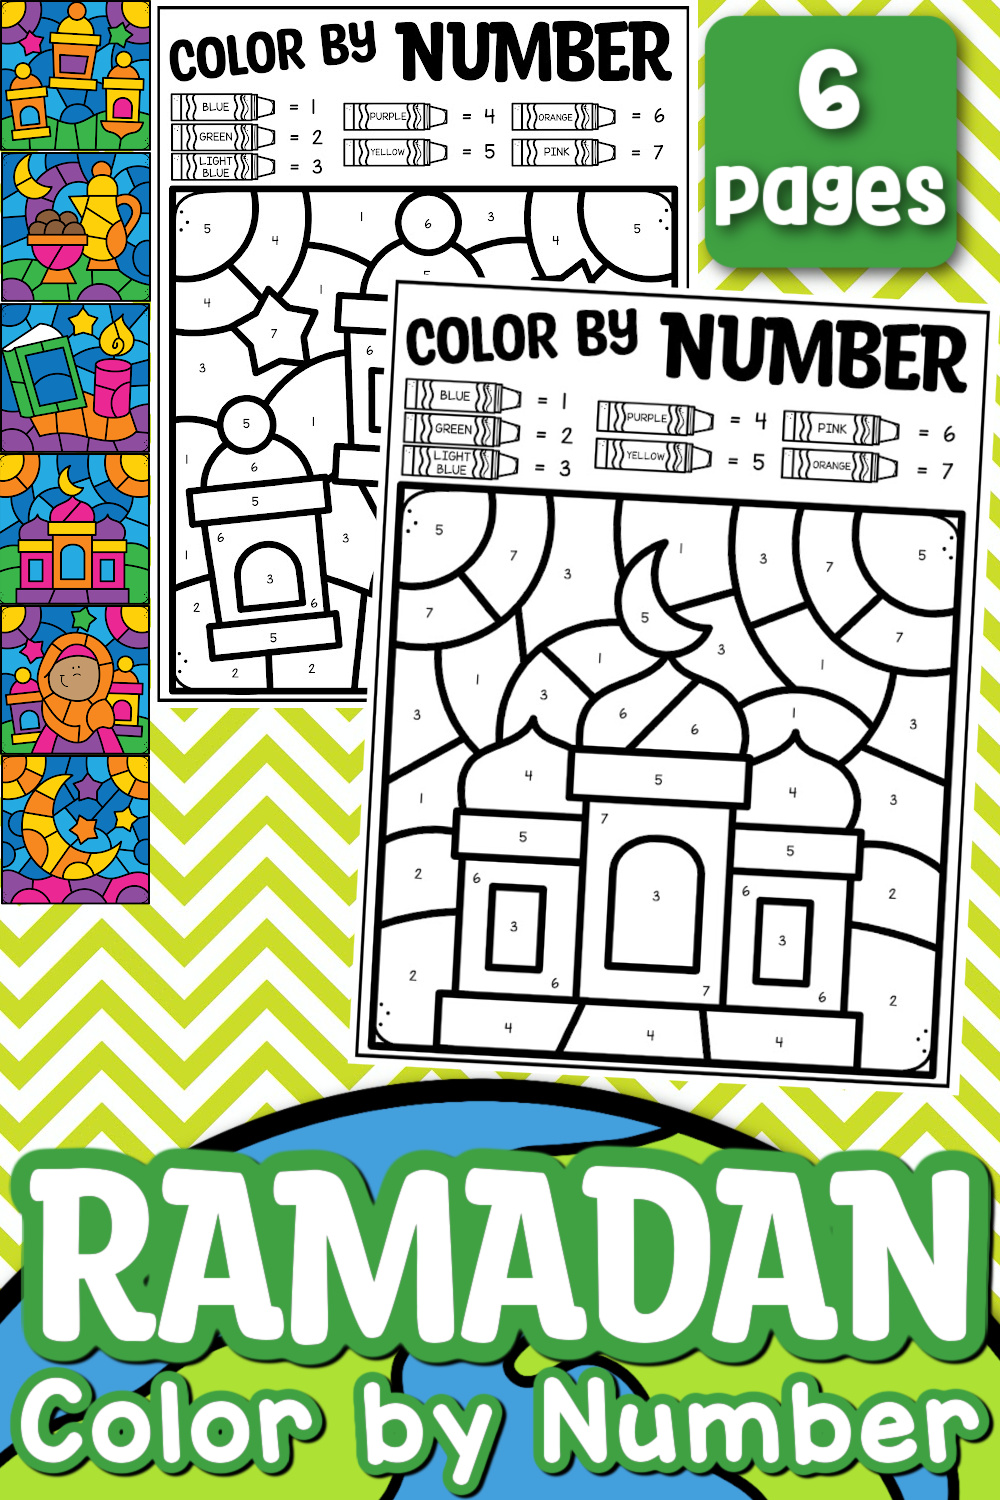 Fun morocco coloring pages for kids